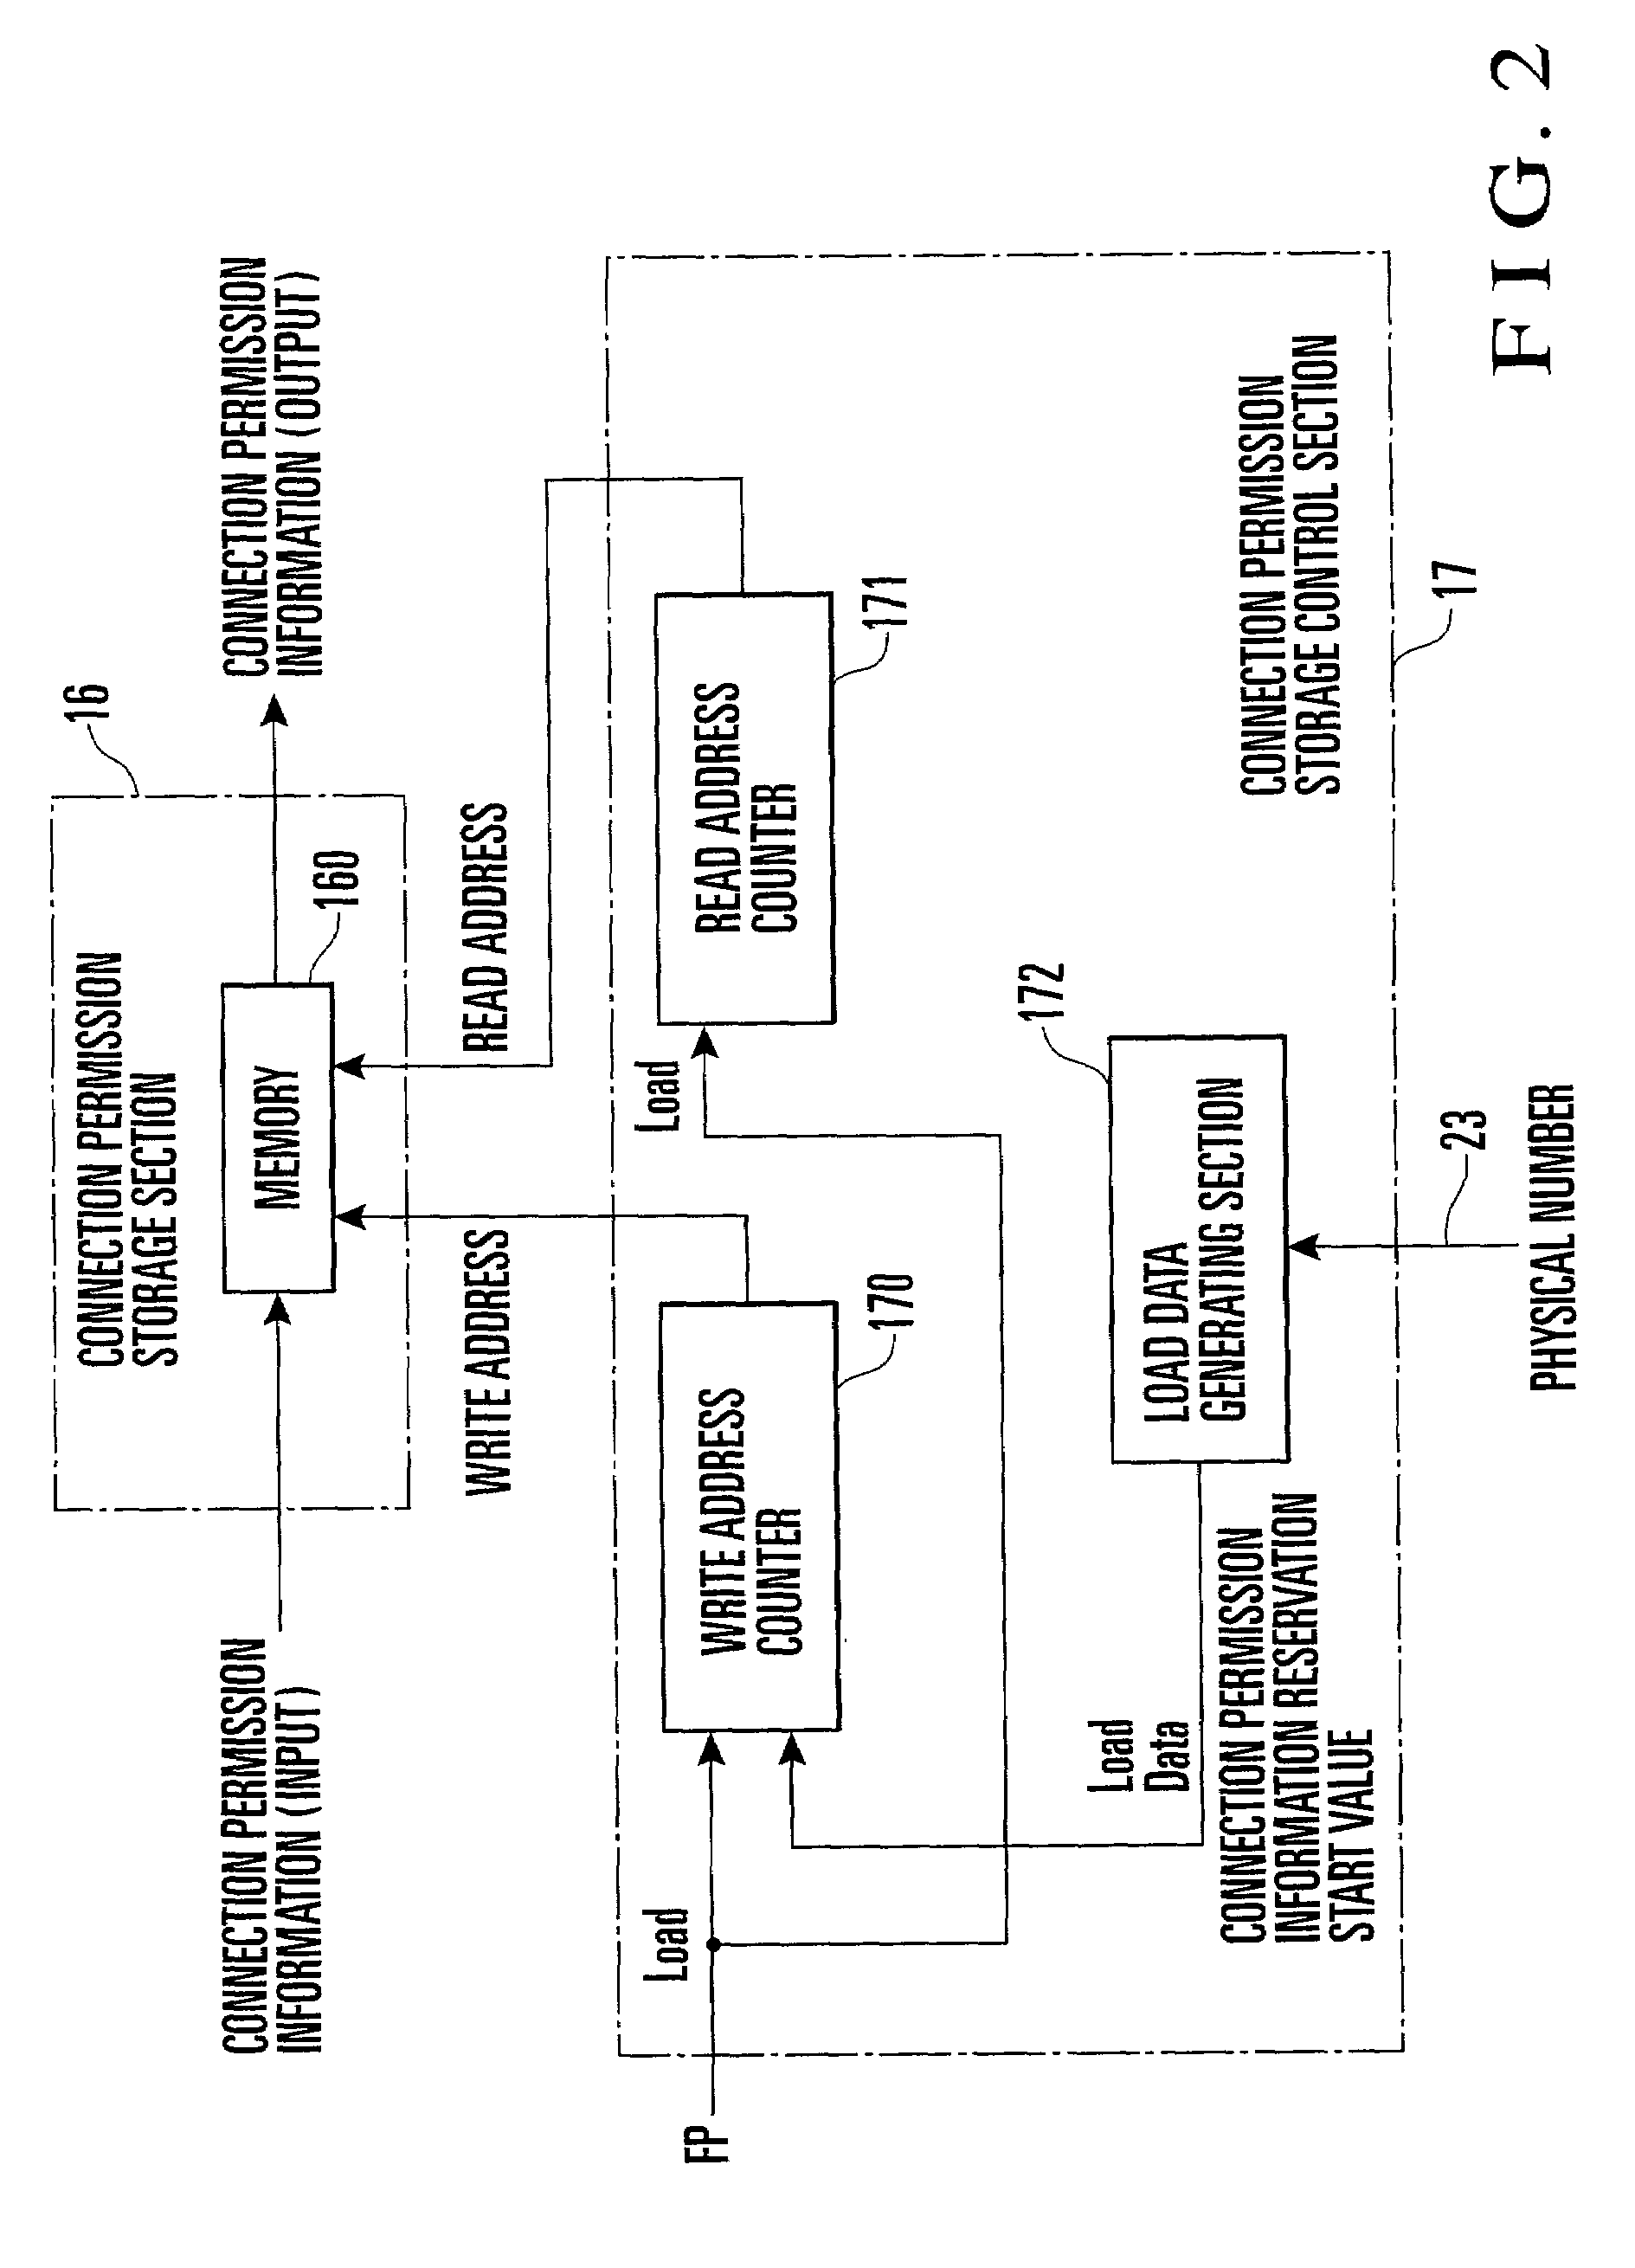 Distributed pipeline scheduling method and system